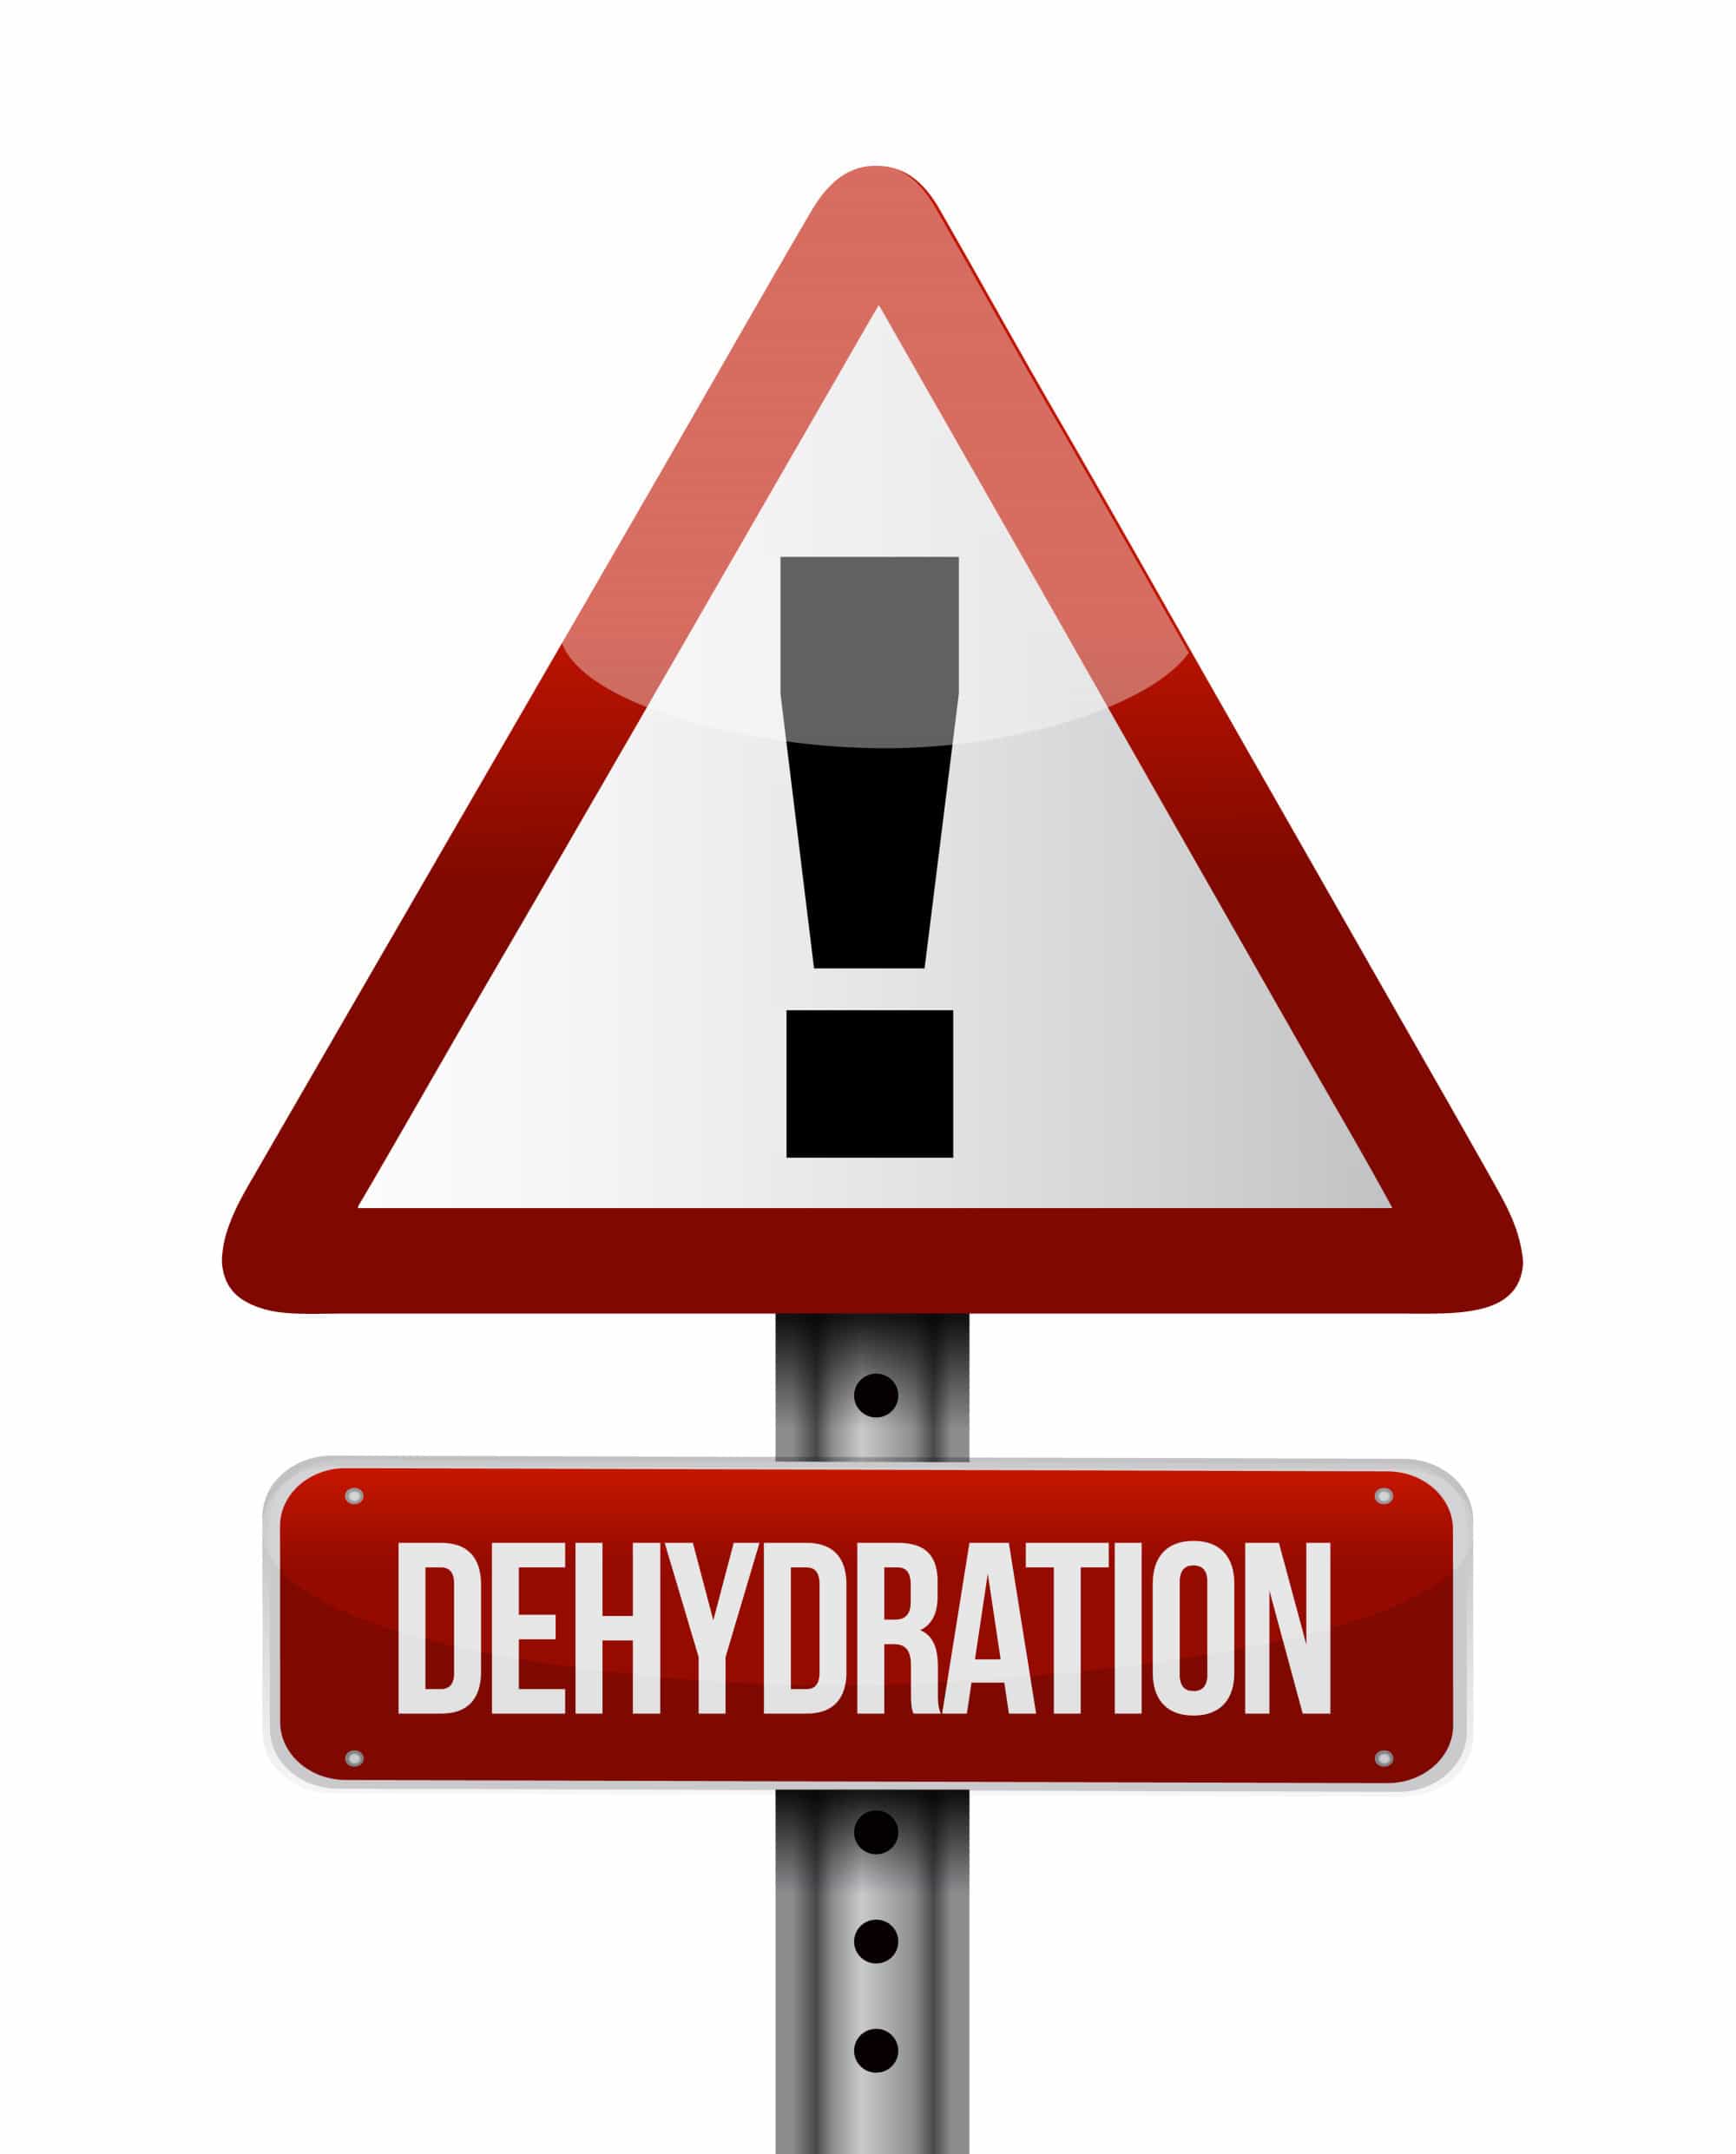 Dehydration can be harmful to the elderly